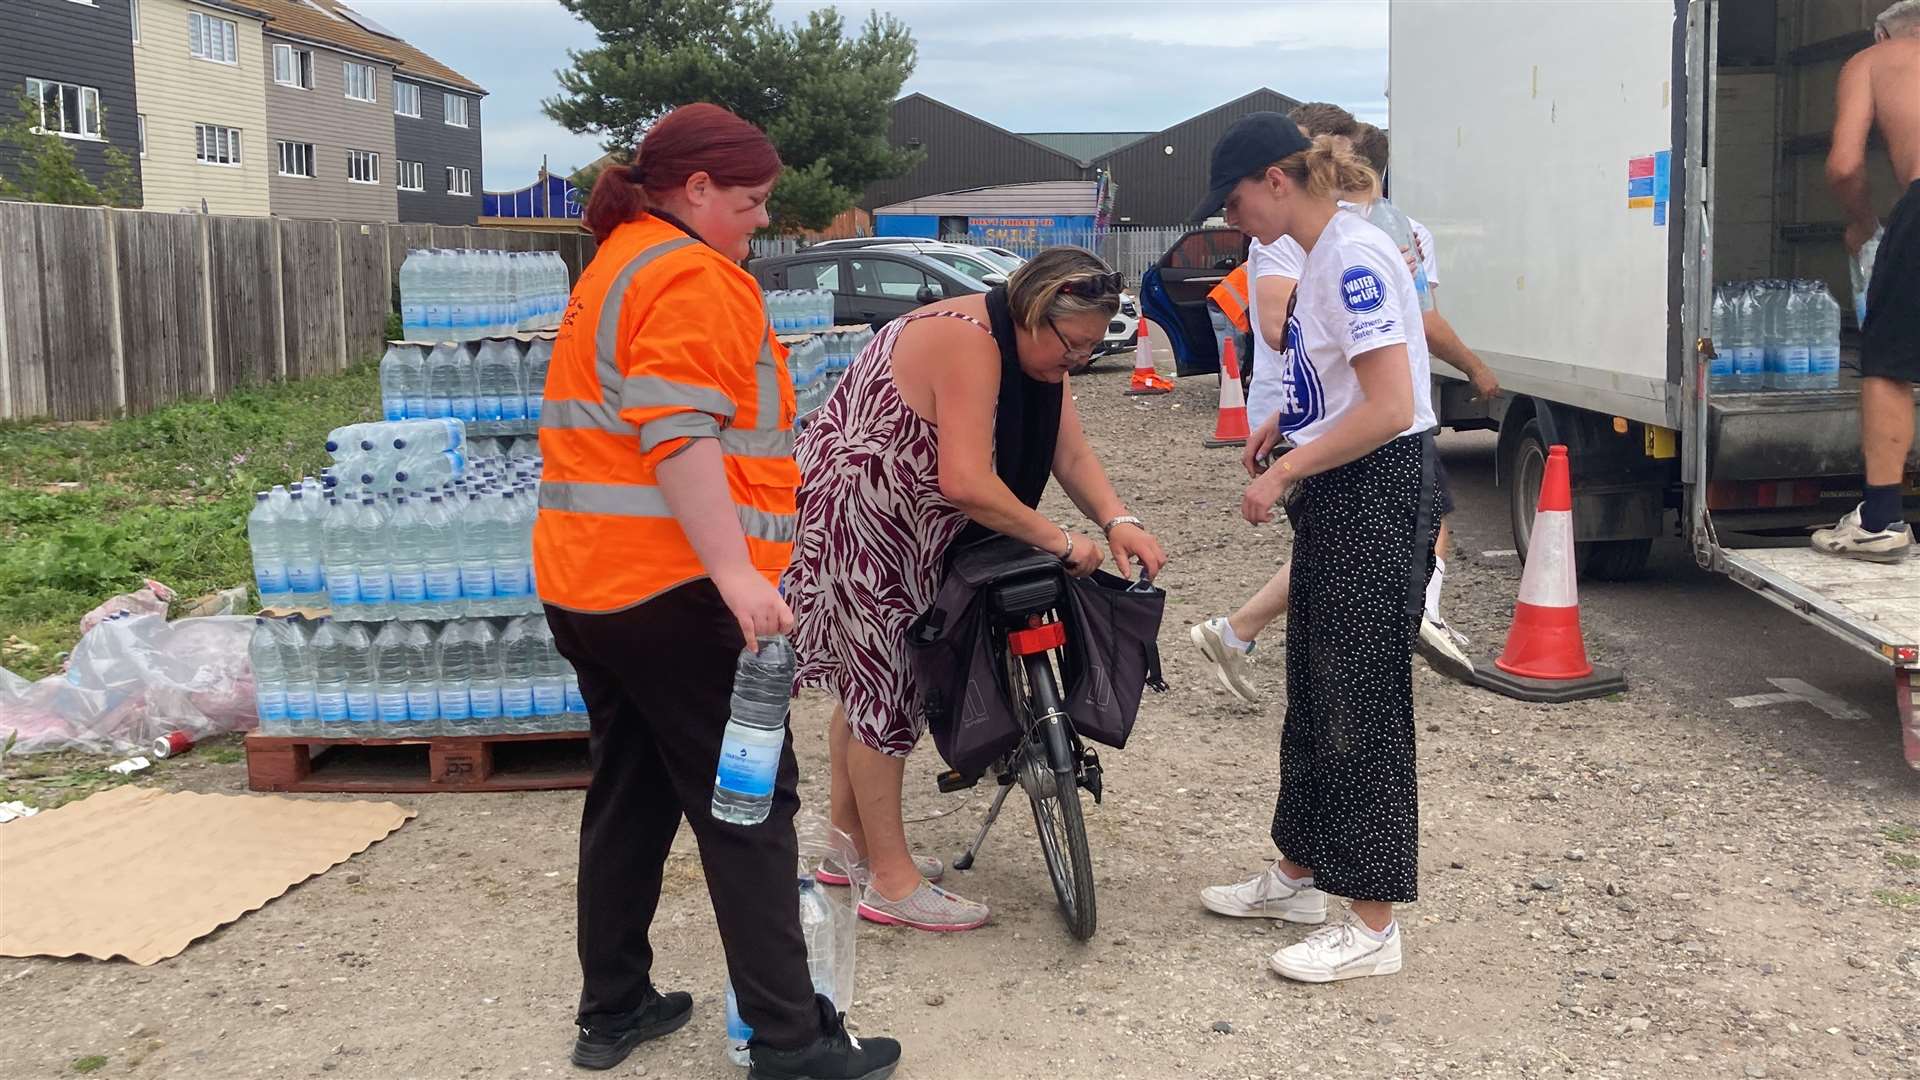 People came in or on all vehicles to get free water bottles when Sheppey lost its supply in July 2022